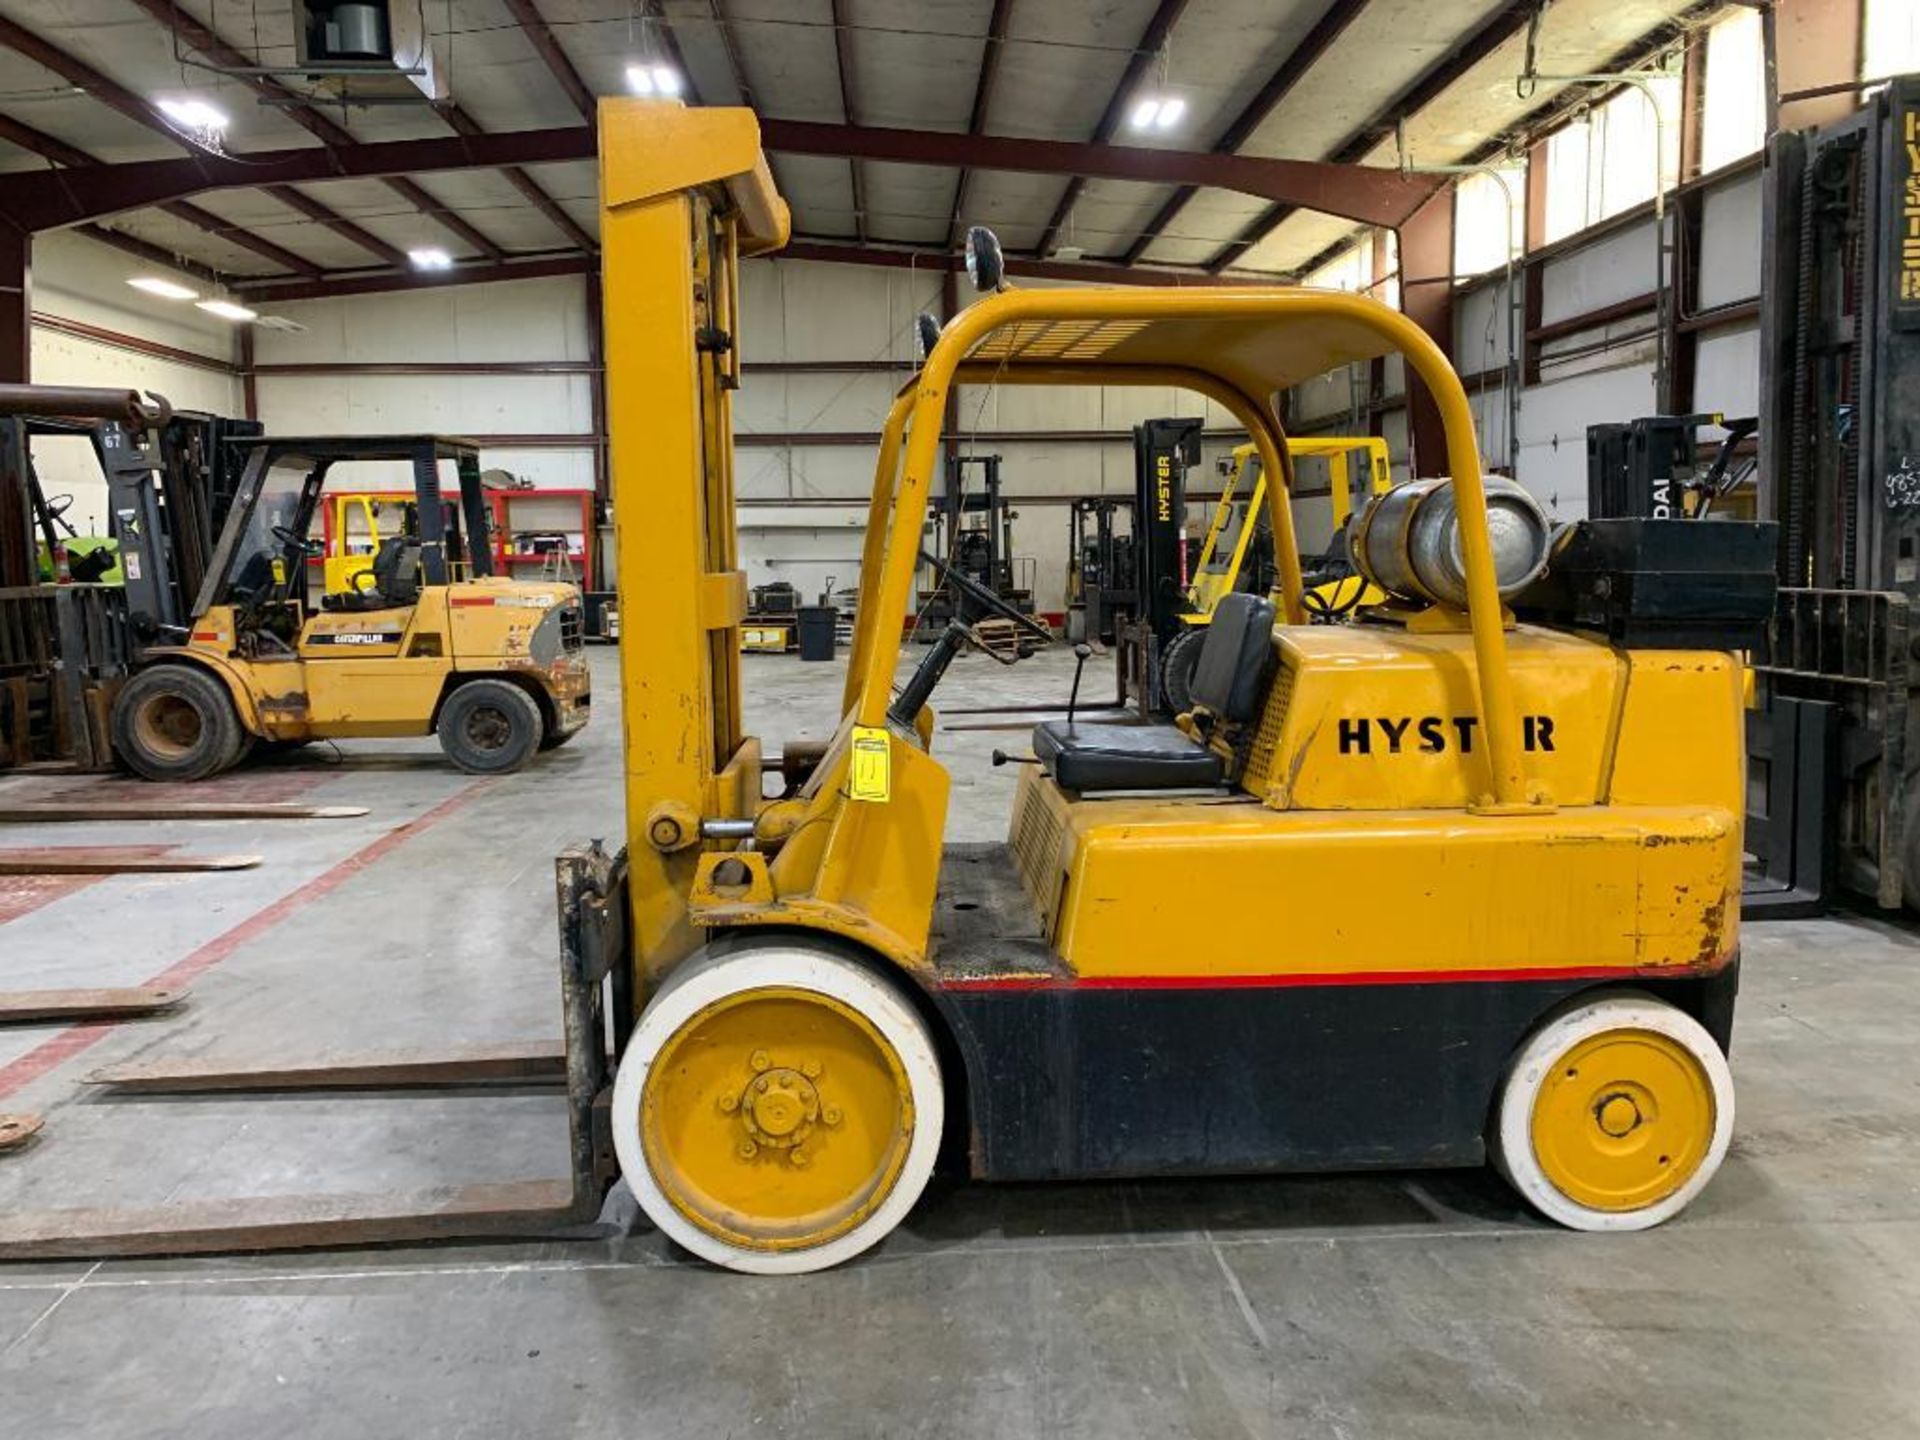 Hyster 15,000 lb. capacity forklift, model s150a, s/n a24d1707n, lpg, 3-speed manual transmission, s